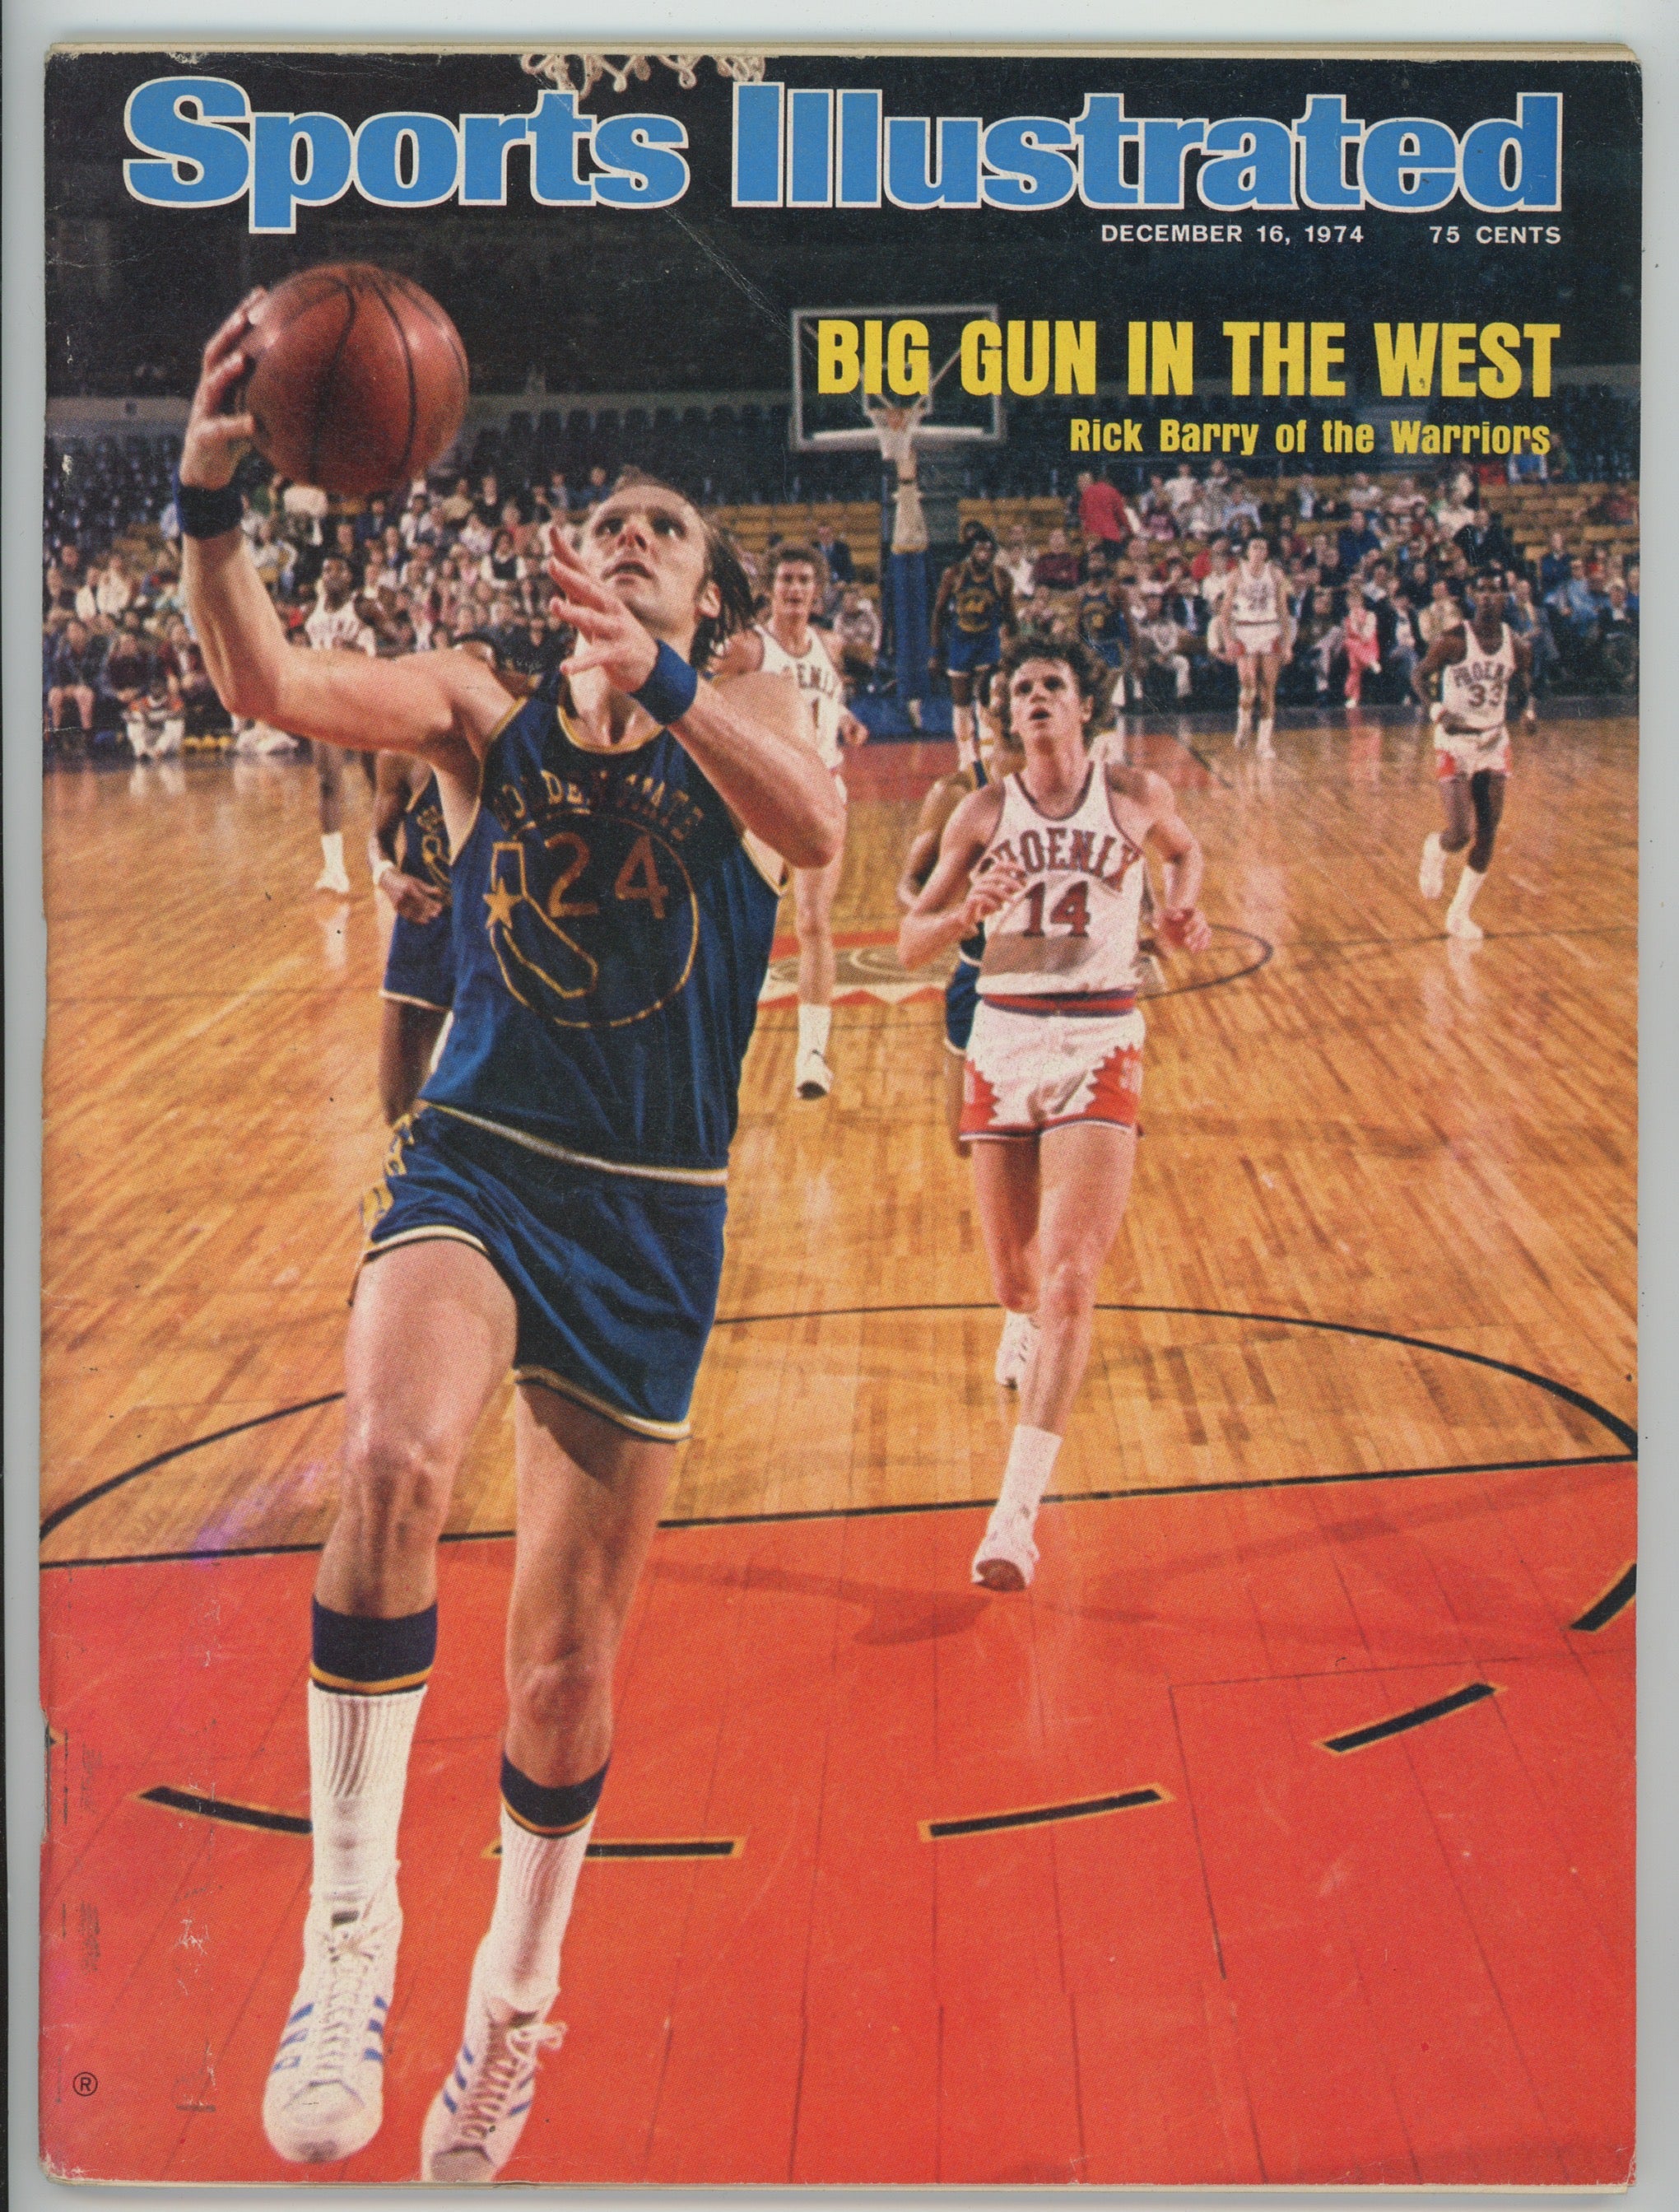 Rick Barry Golden State Warriors "Big Gun in the West" 12/16/74 Sports Illustrated RML